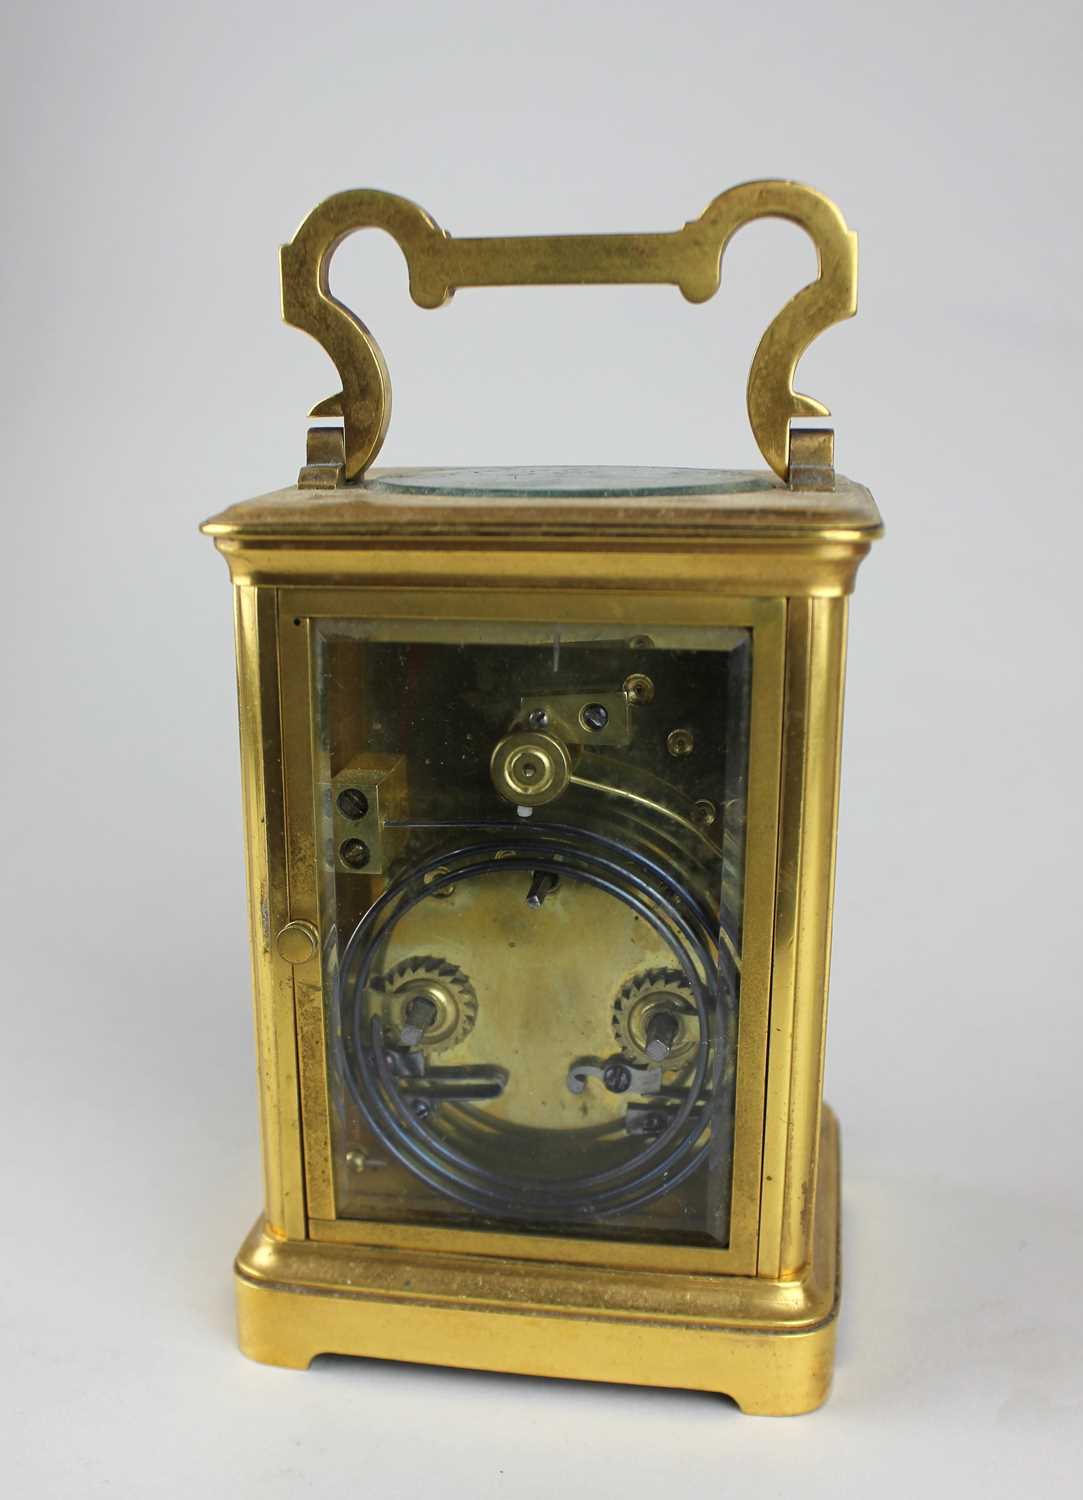 A 19th century French gilt brass carriage clock, the white enamel dial with Roman numerals, striking - Image 3 of 5